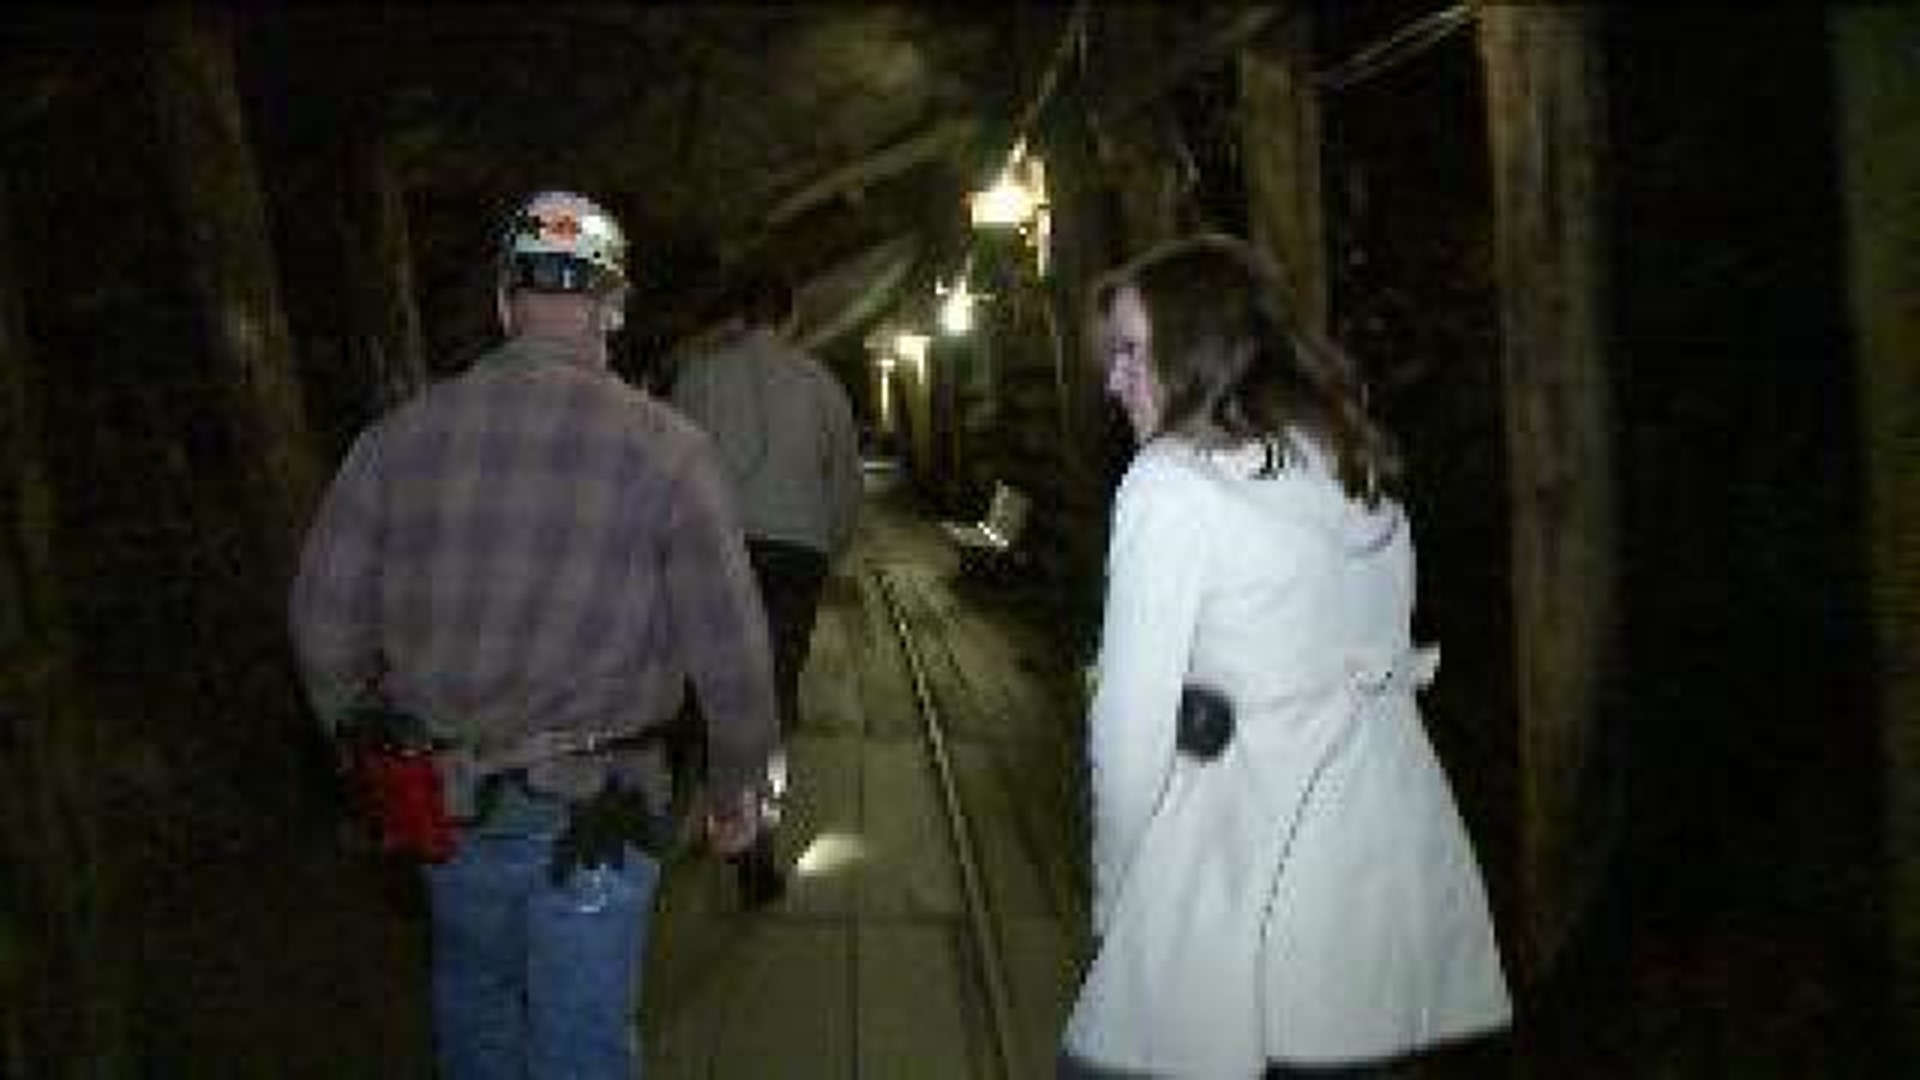 Lackawanna Coal Mine Tour Opens After Delay